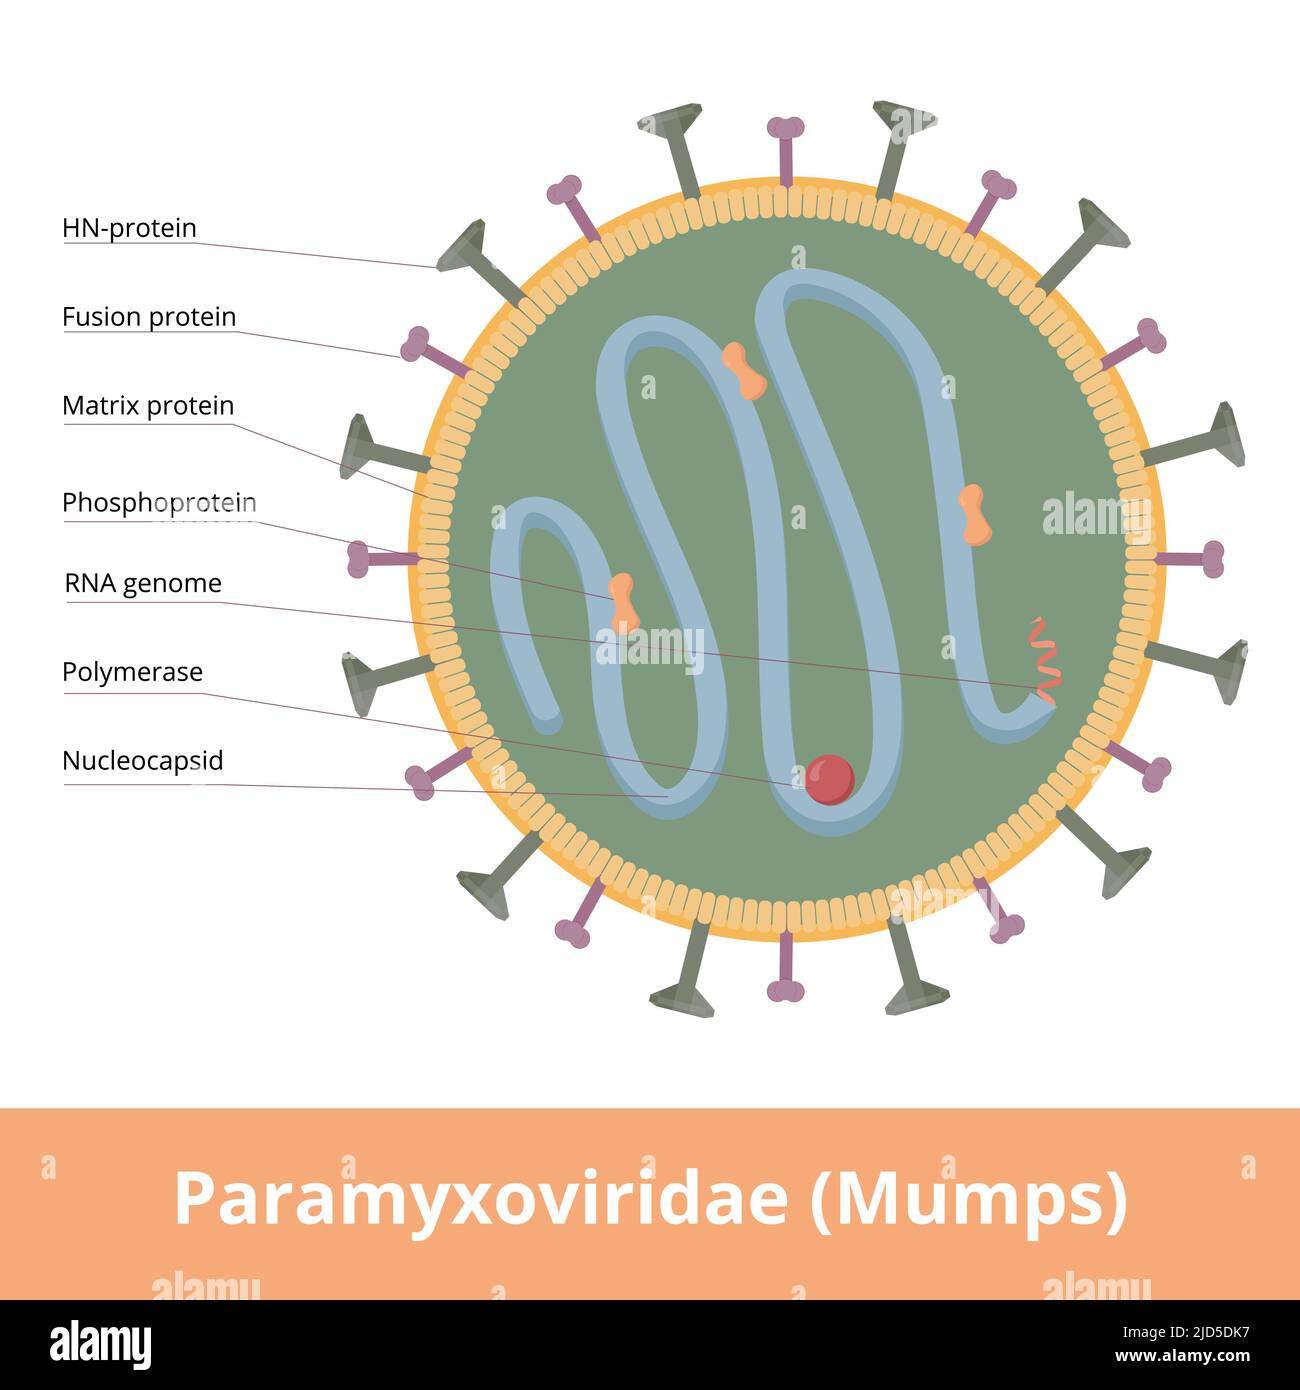 Paramyxoviridae (Mumps) is negative-sense single stranded RNA viruses that cause a wide variety of diseases. Virion includes fusion and matrix protein. Stock Vector